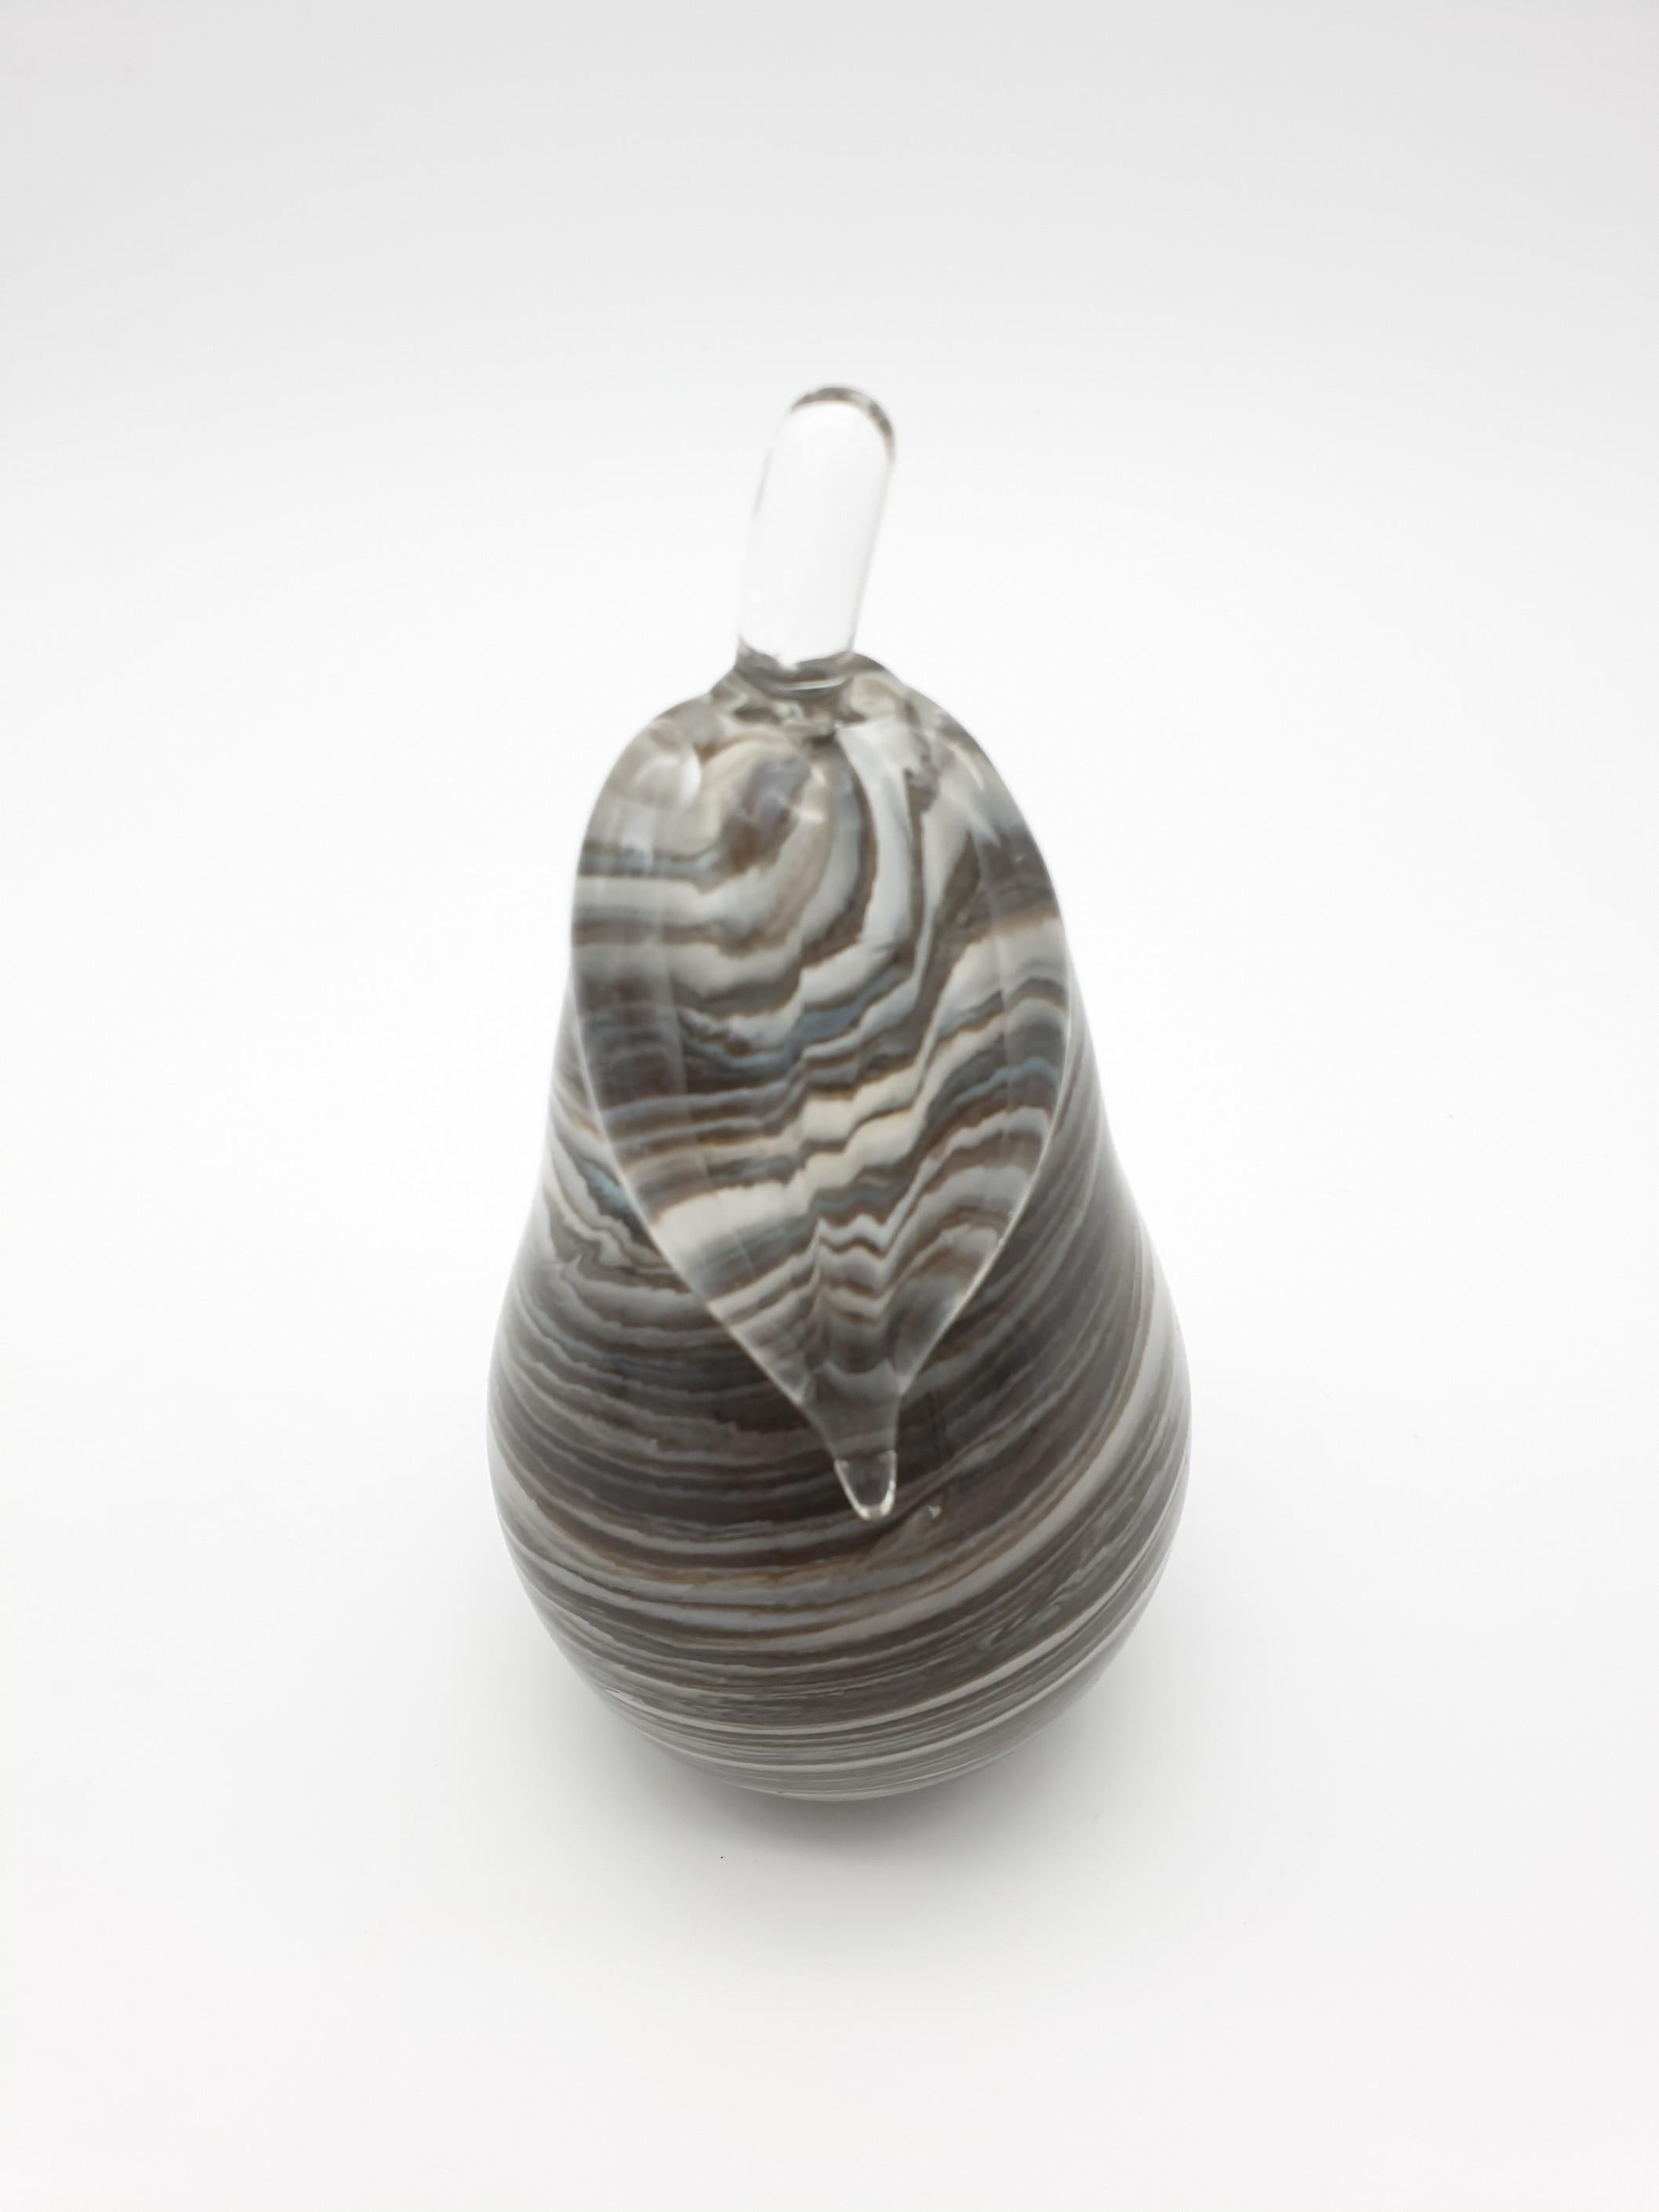 Italian Modern Murano Glass Decorative Apple and Pear, Marbled Gray Color, late 1990s For Sale